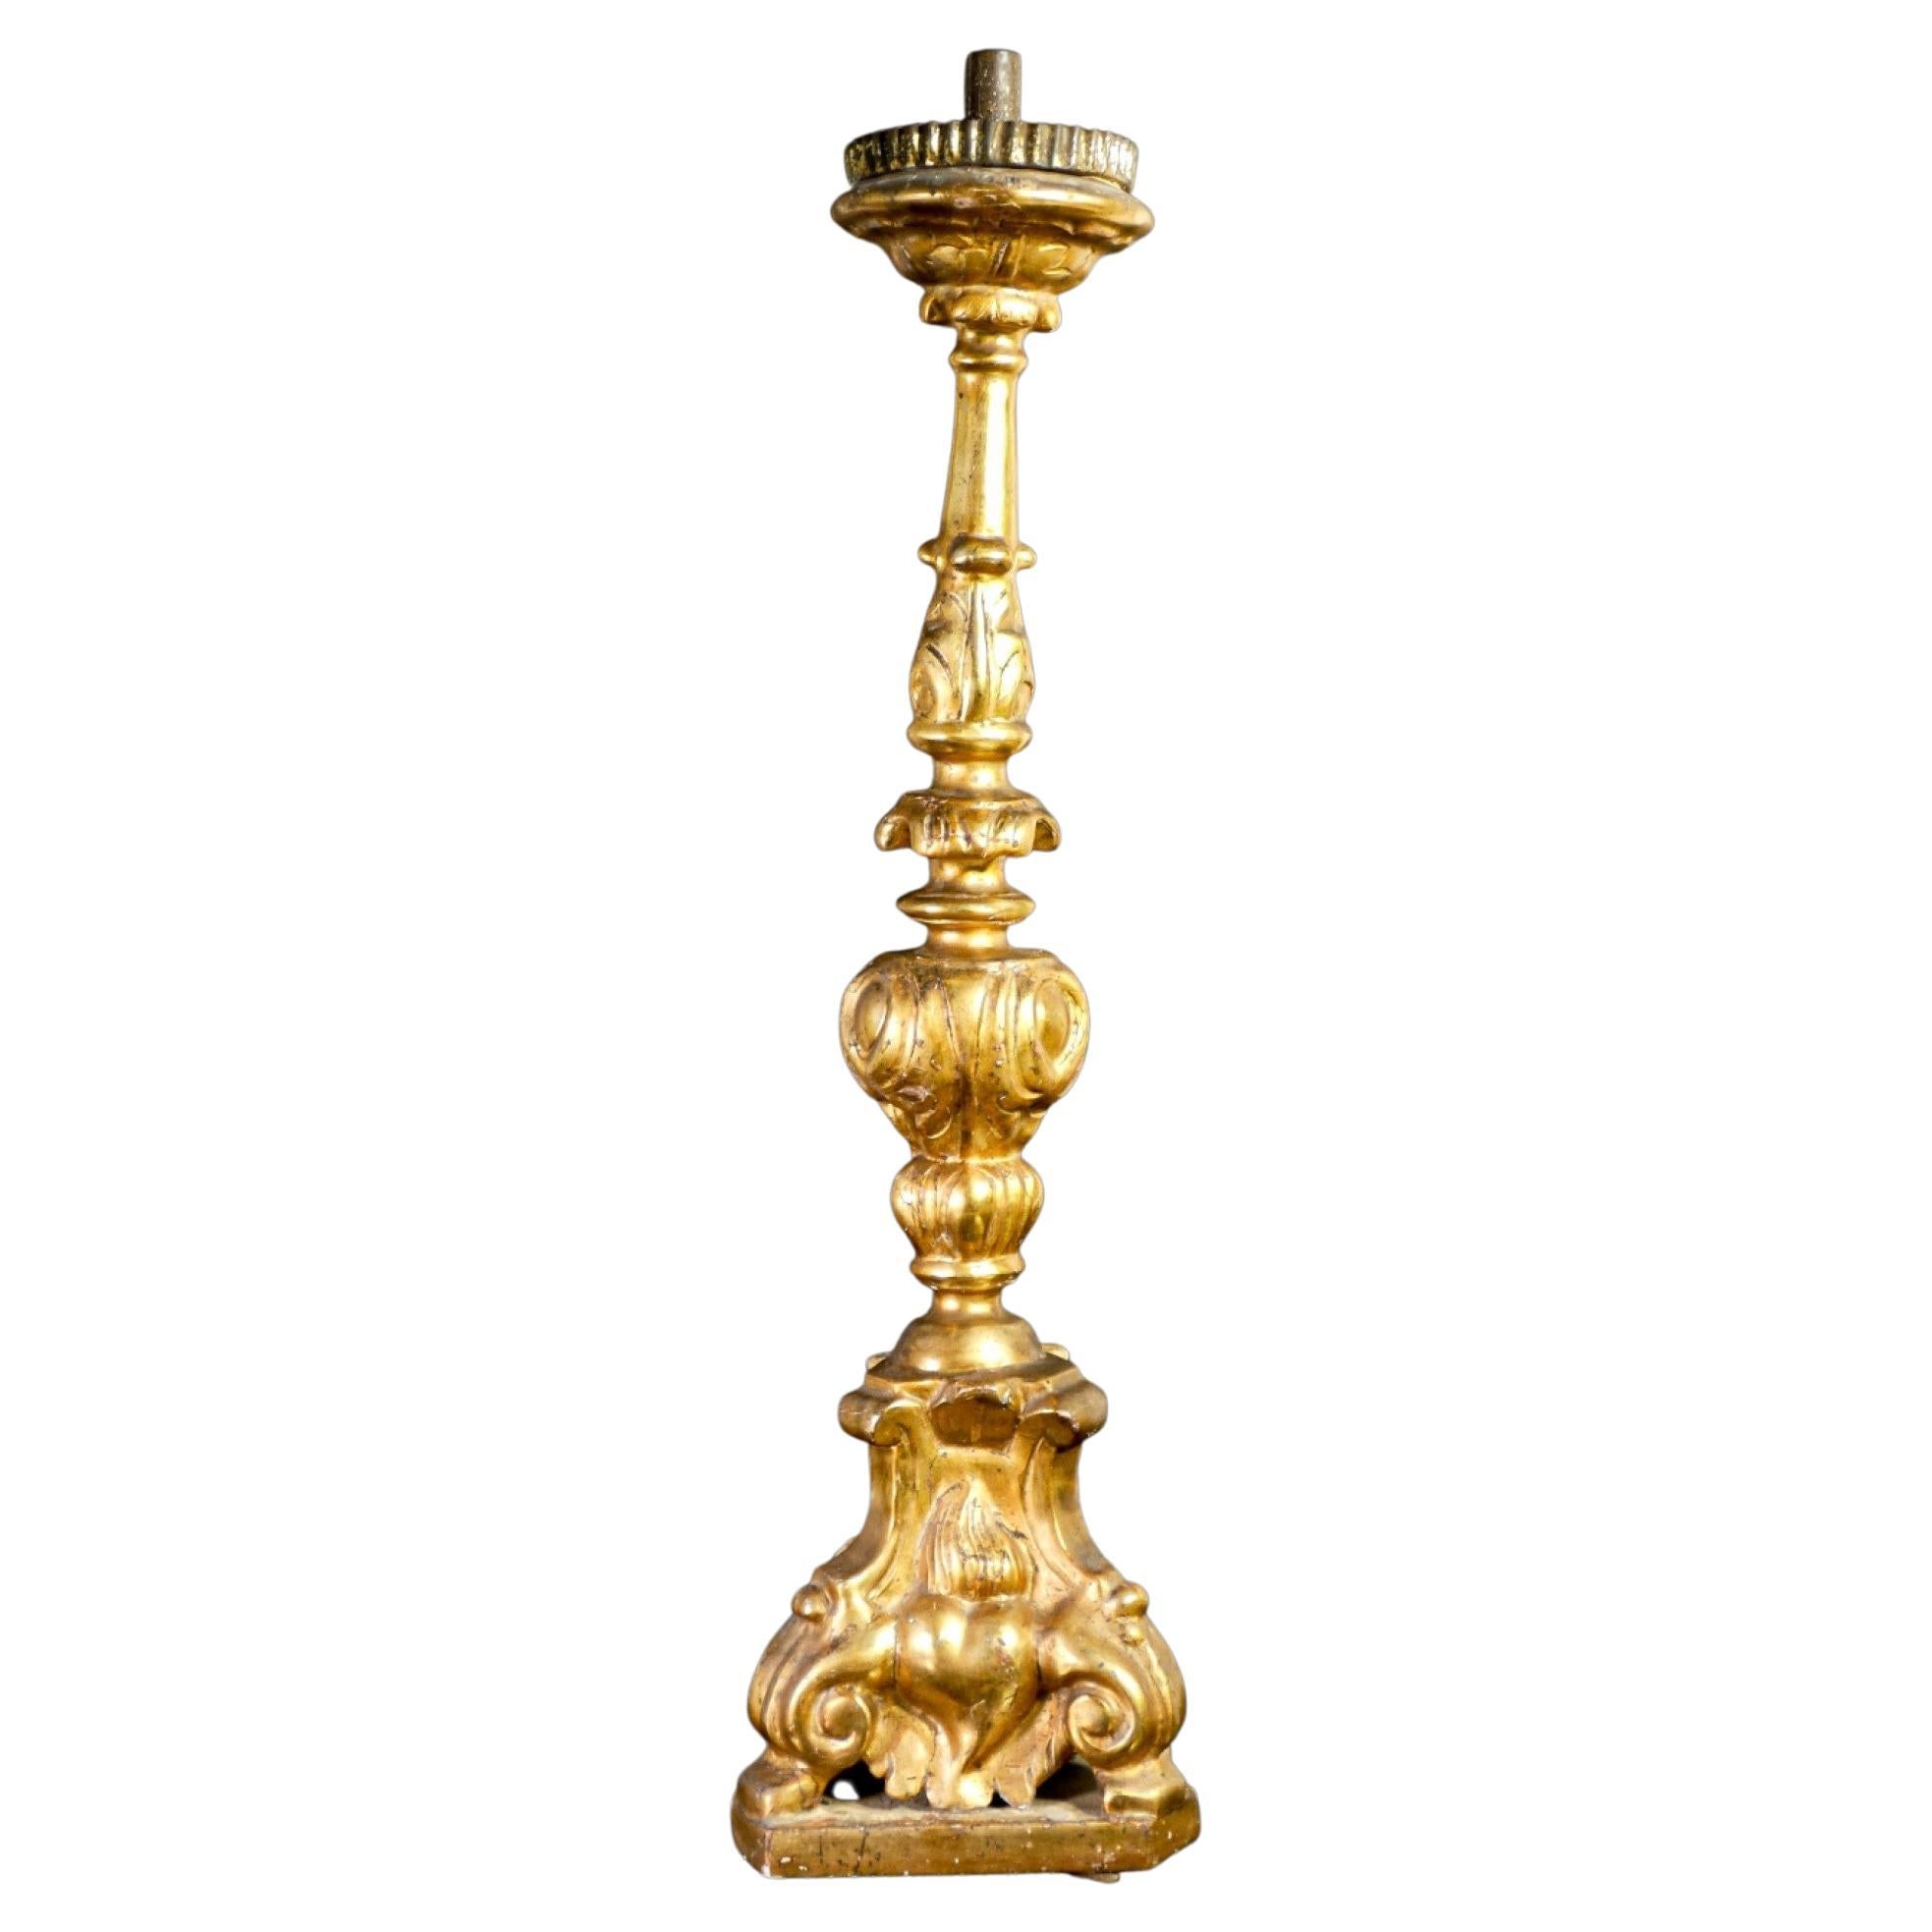 Original Louis XV Candlestick, in Carved Wood, 'Mecca' Gilded, Italy, 1730-1740